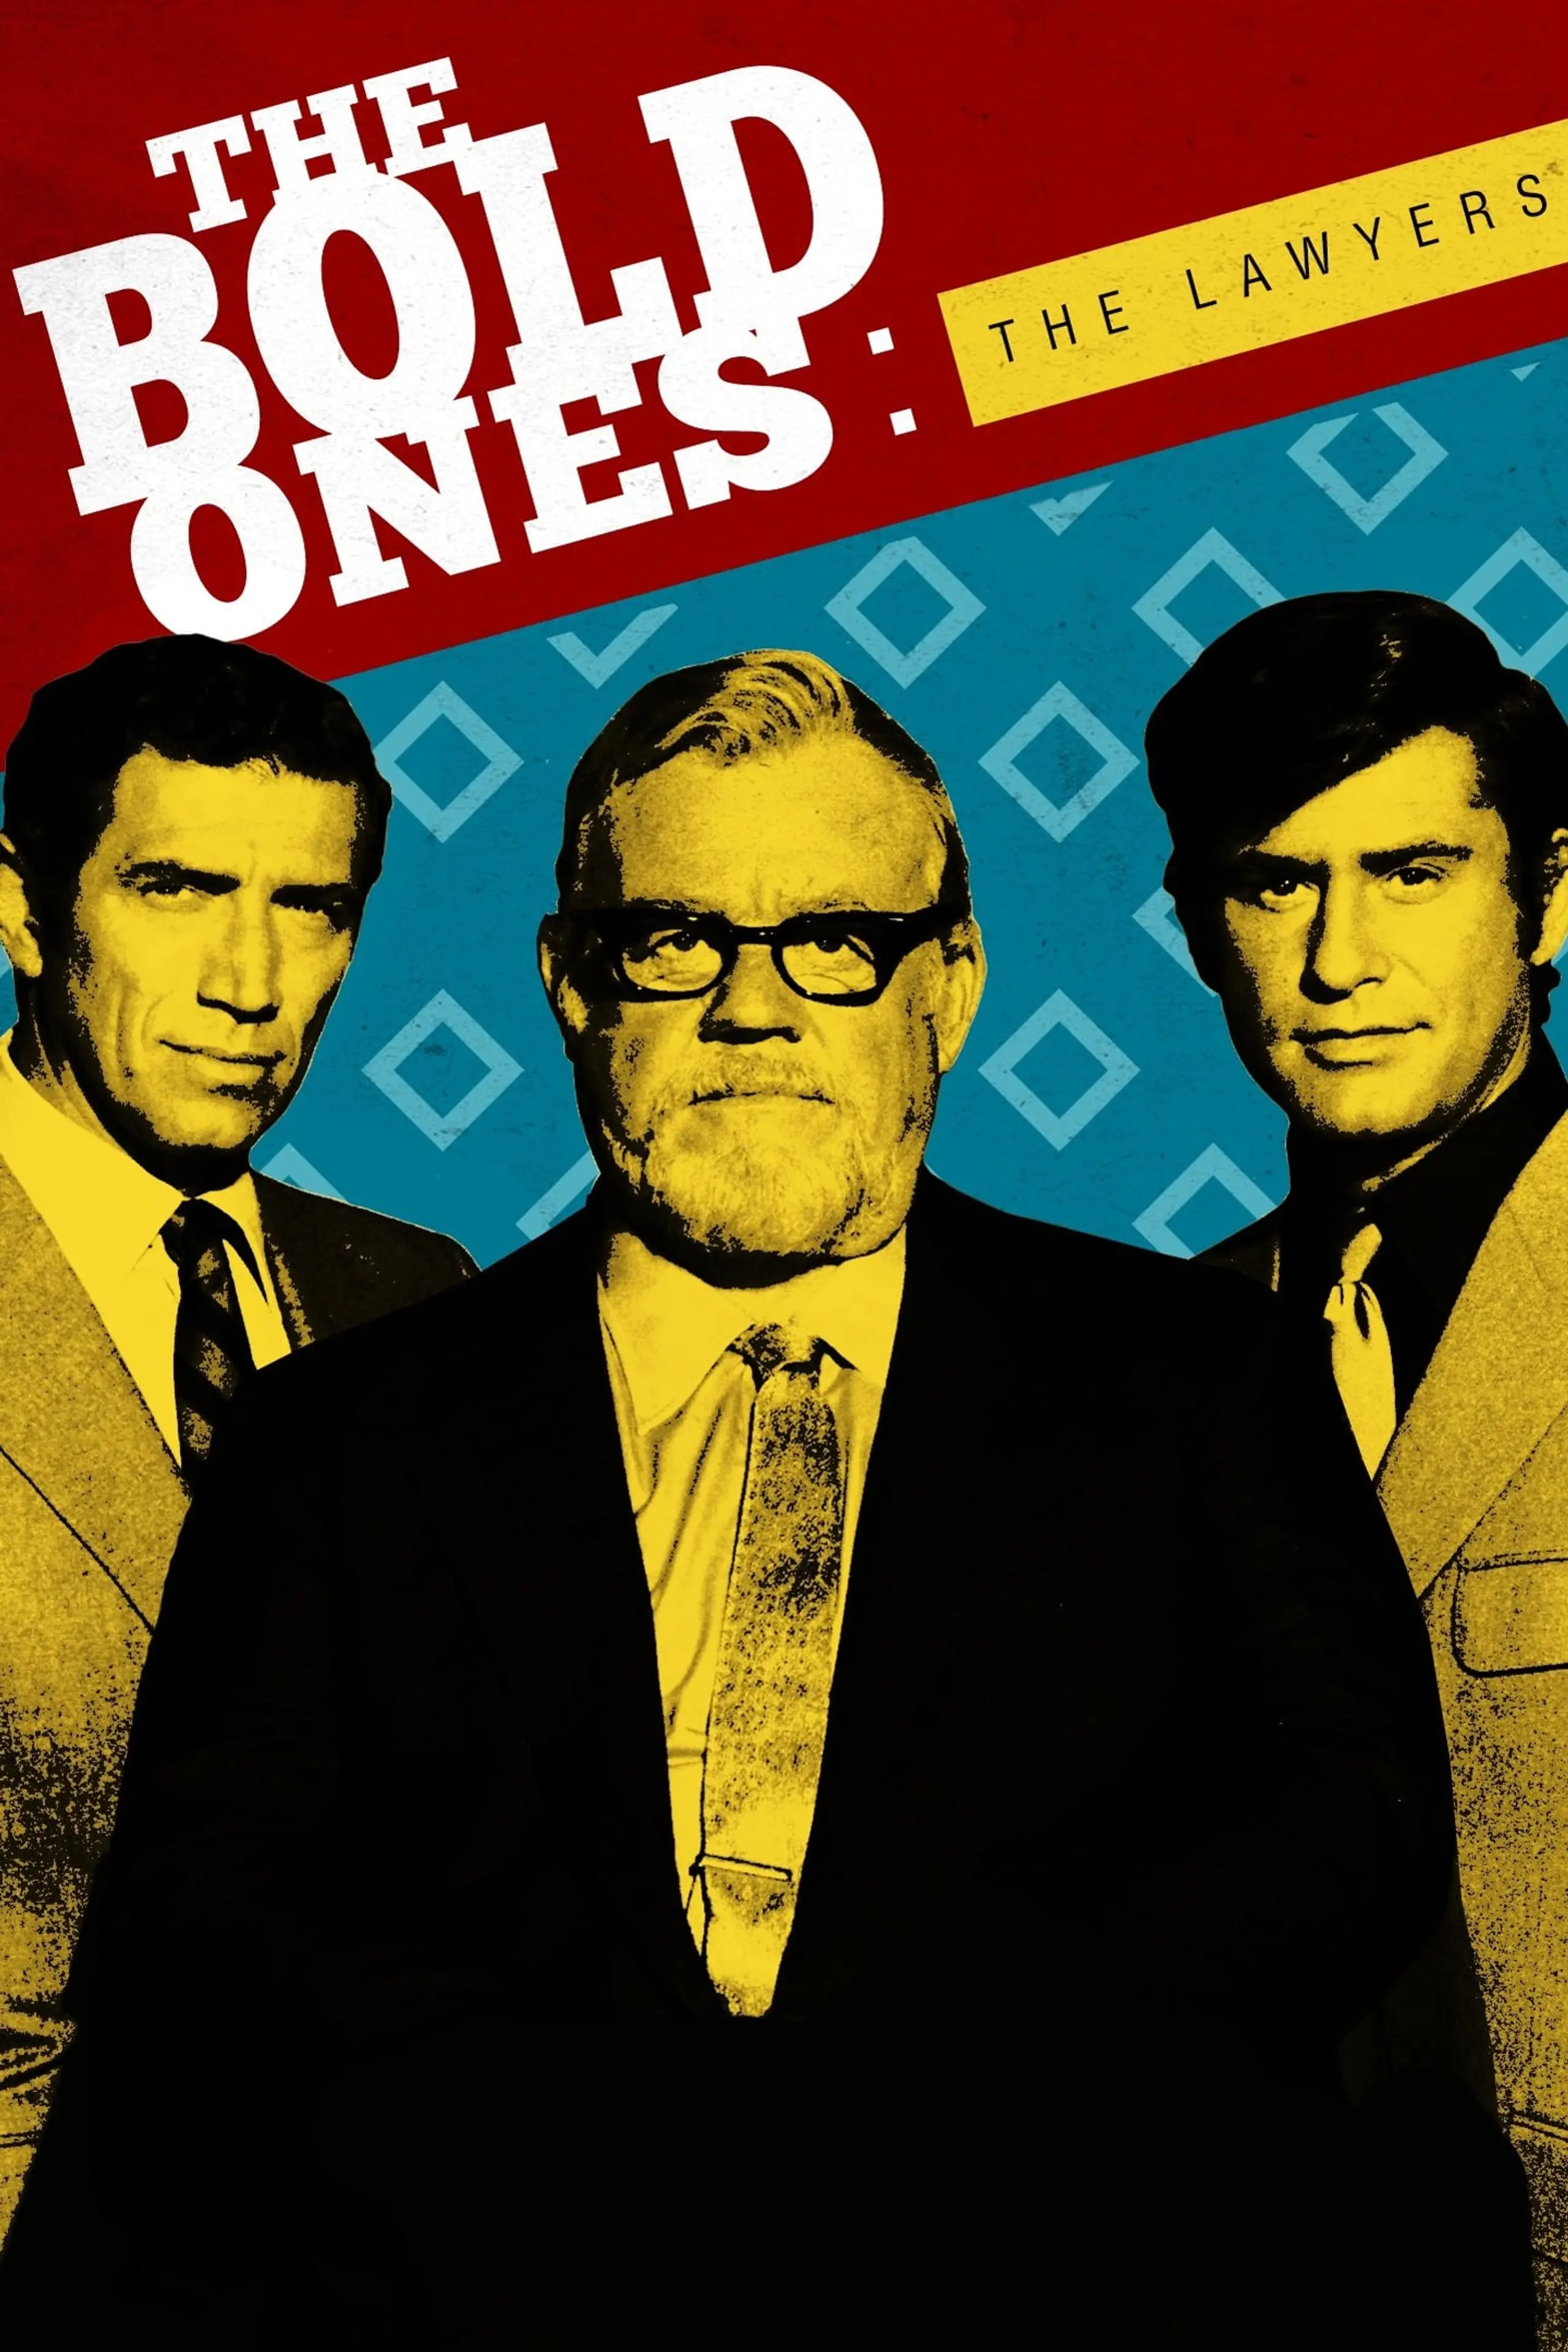 The Bold Ones: The Lawyers